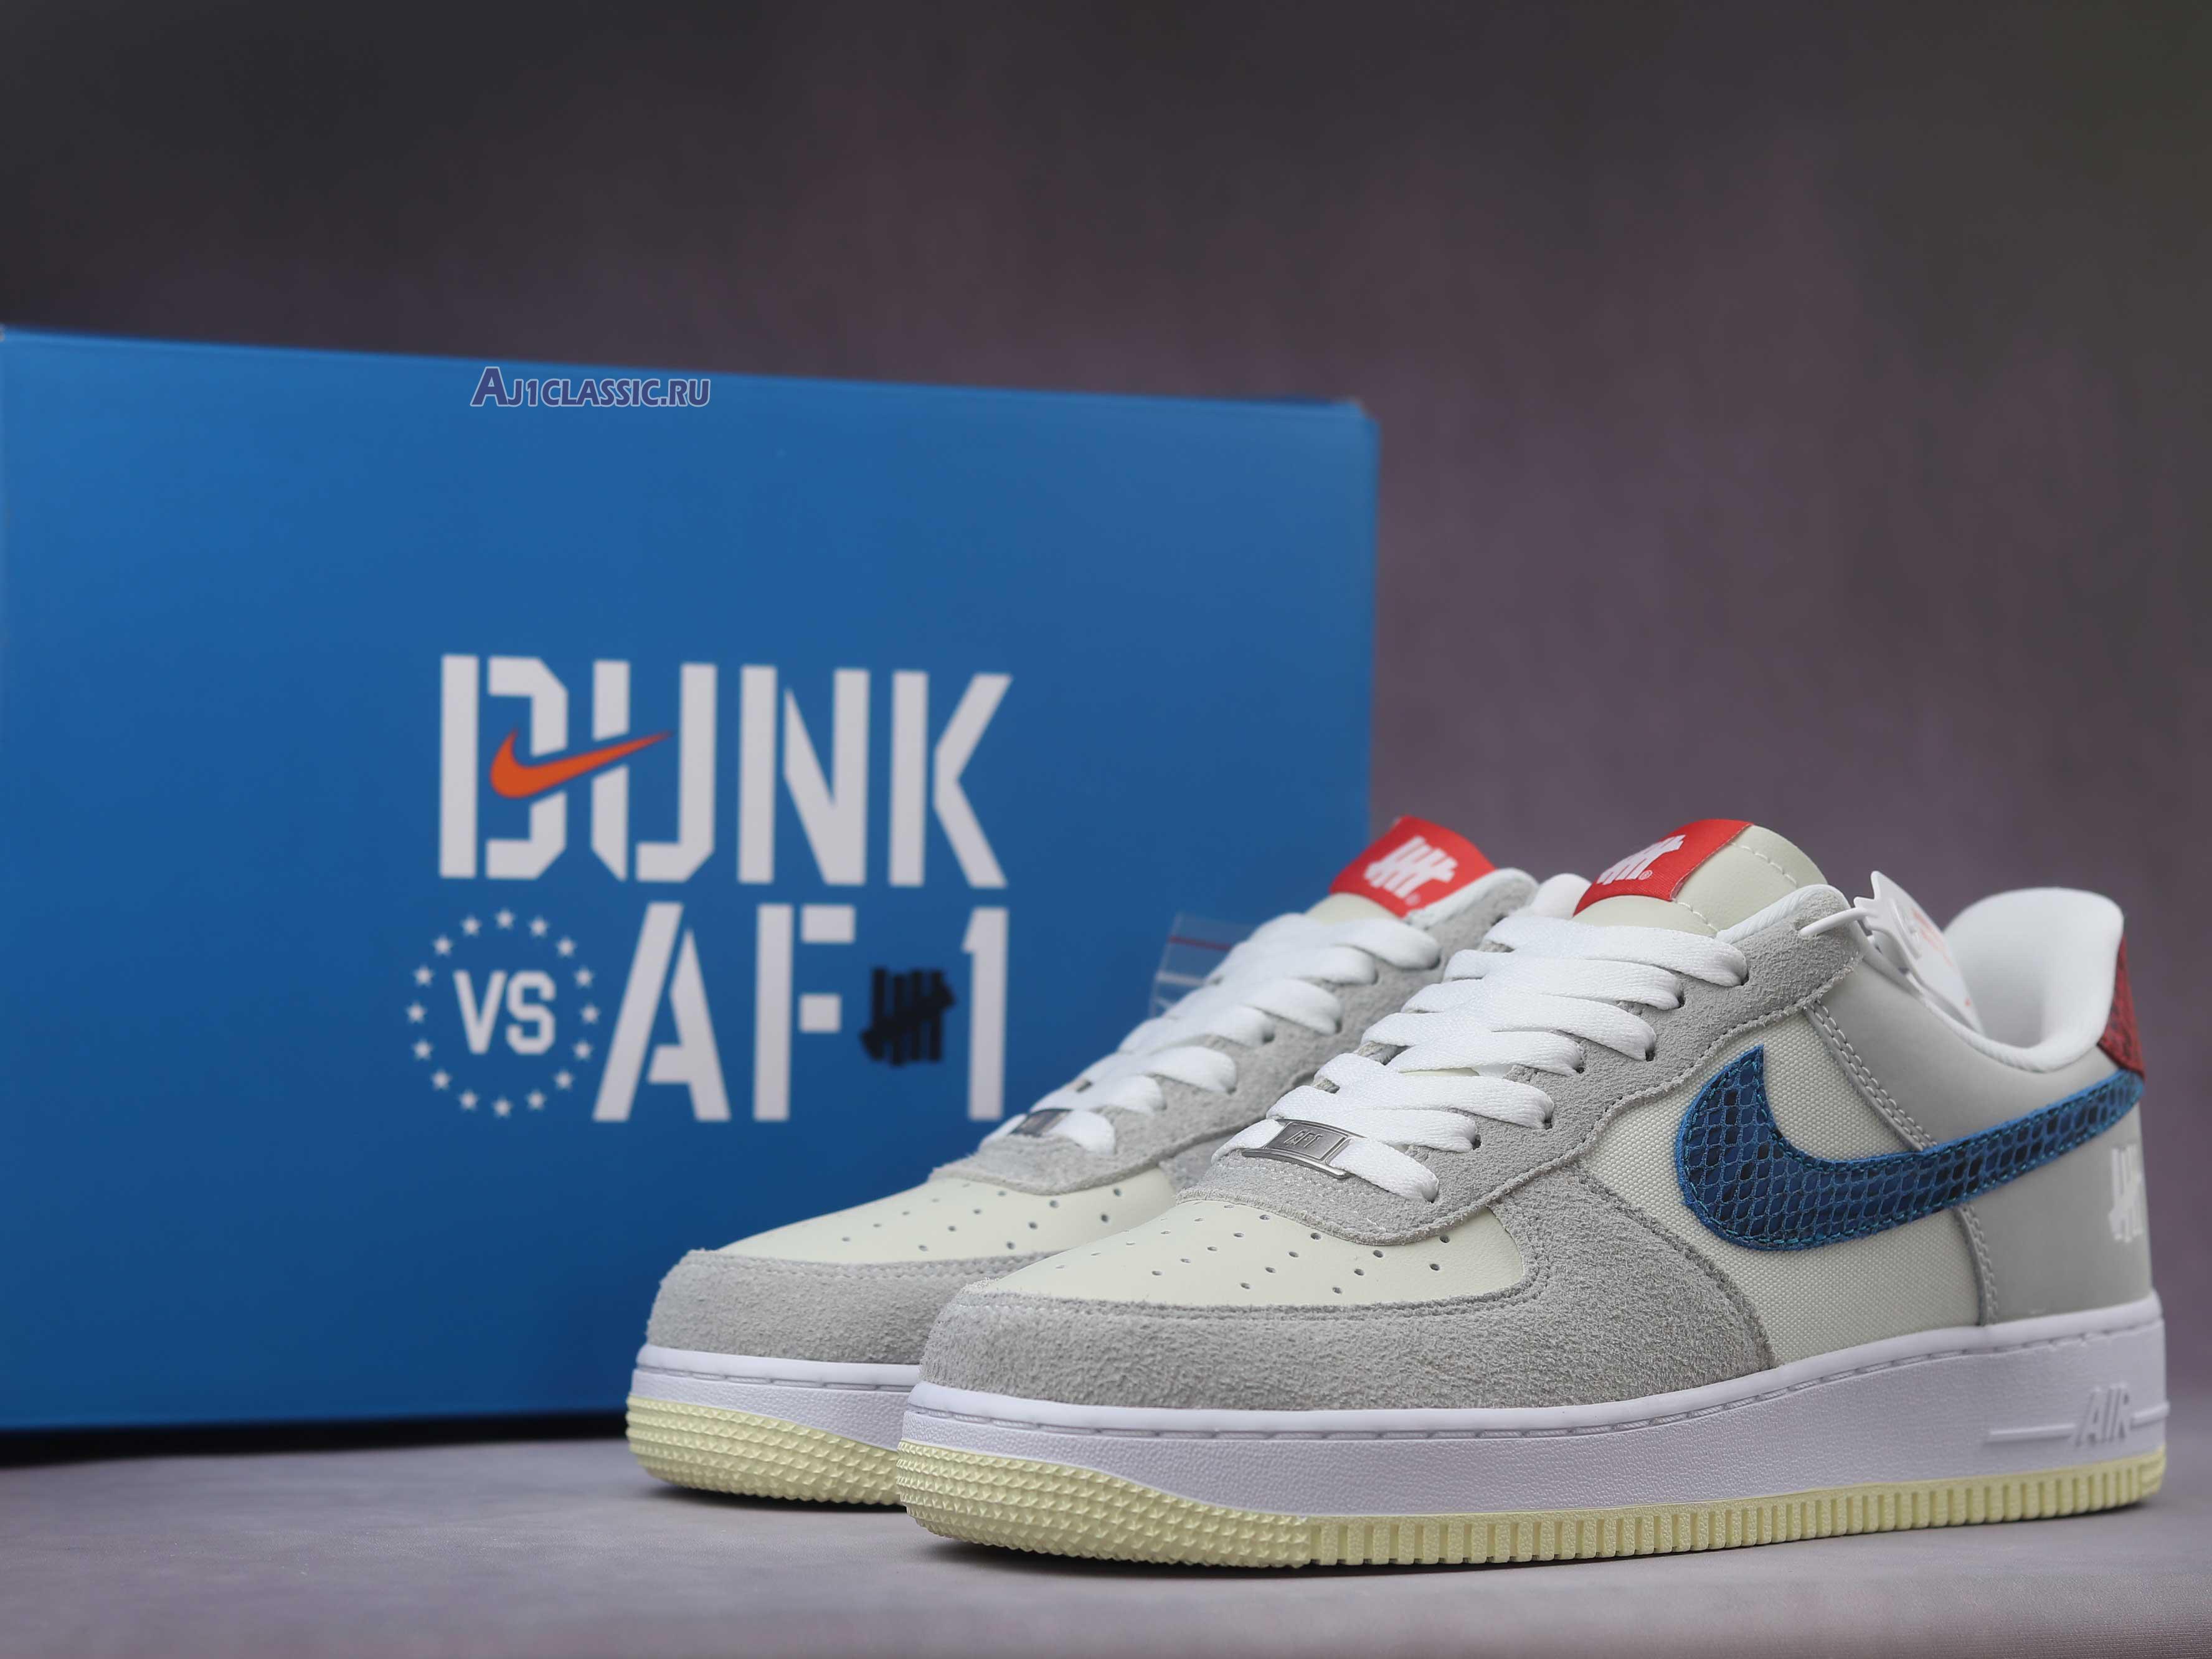 Undefeated x Air Force 1 Low 5 On It DM8461-001 Grey Fog/Imperial Blue Sneakers